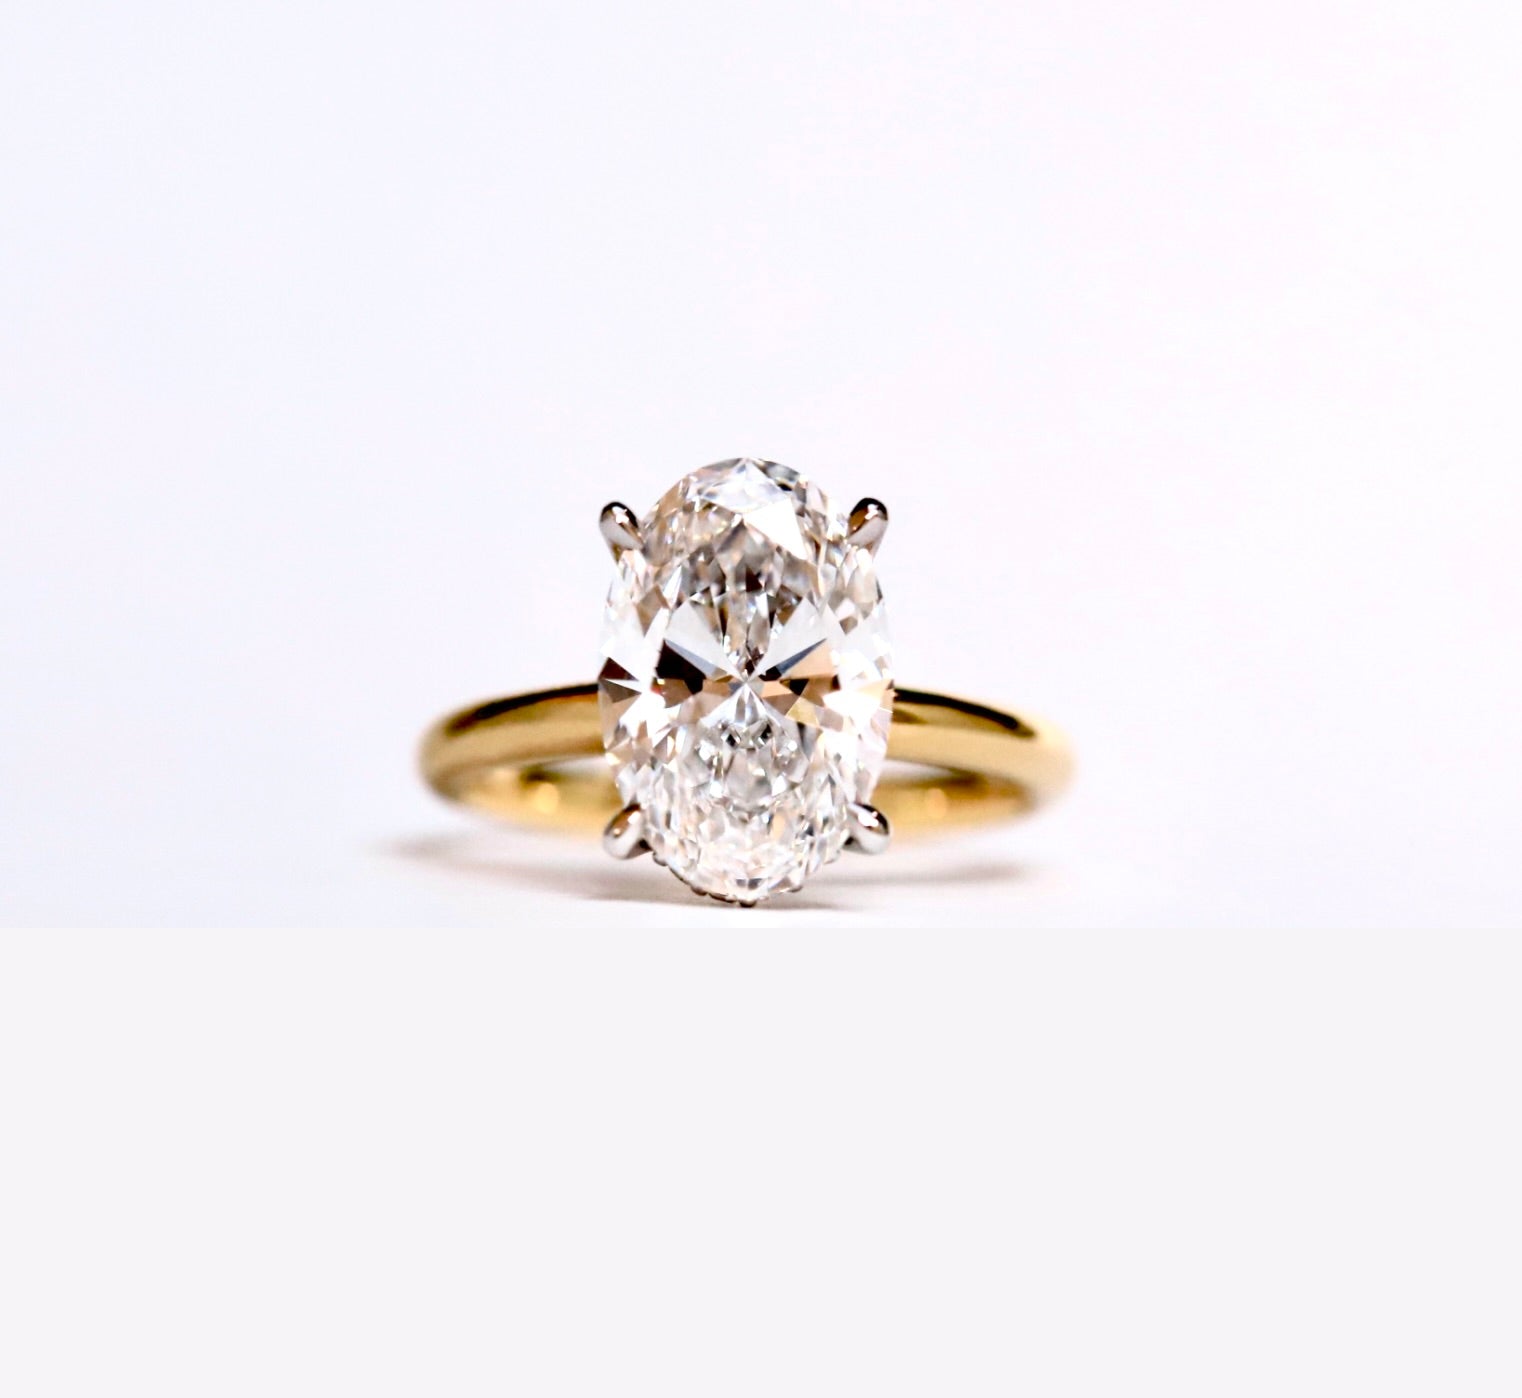 The Classic Hidden Halo Oval Engagement Ring in Yellow gold